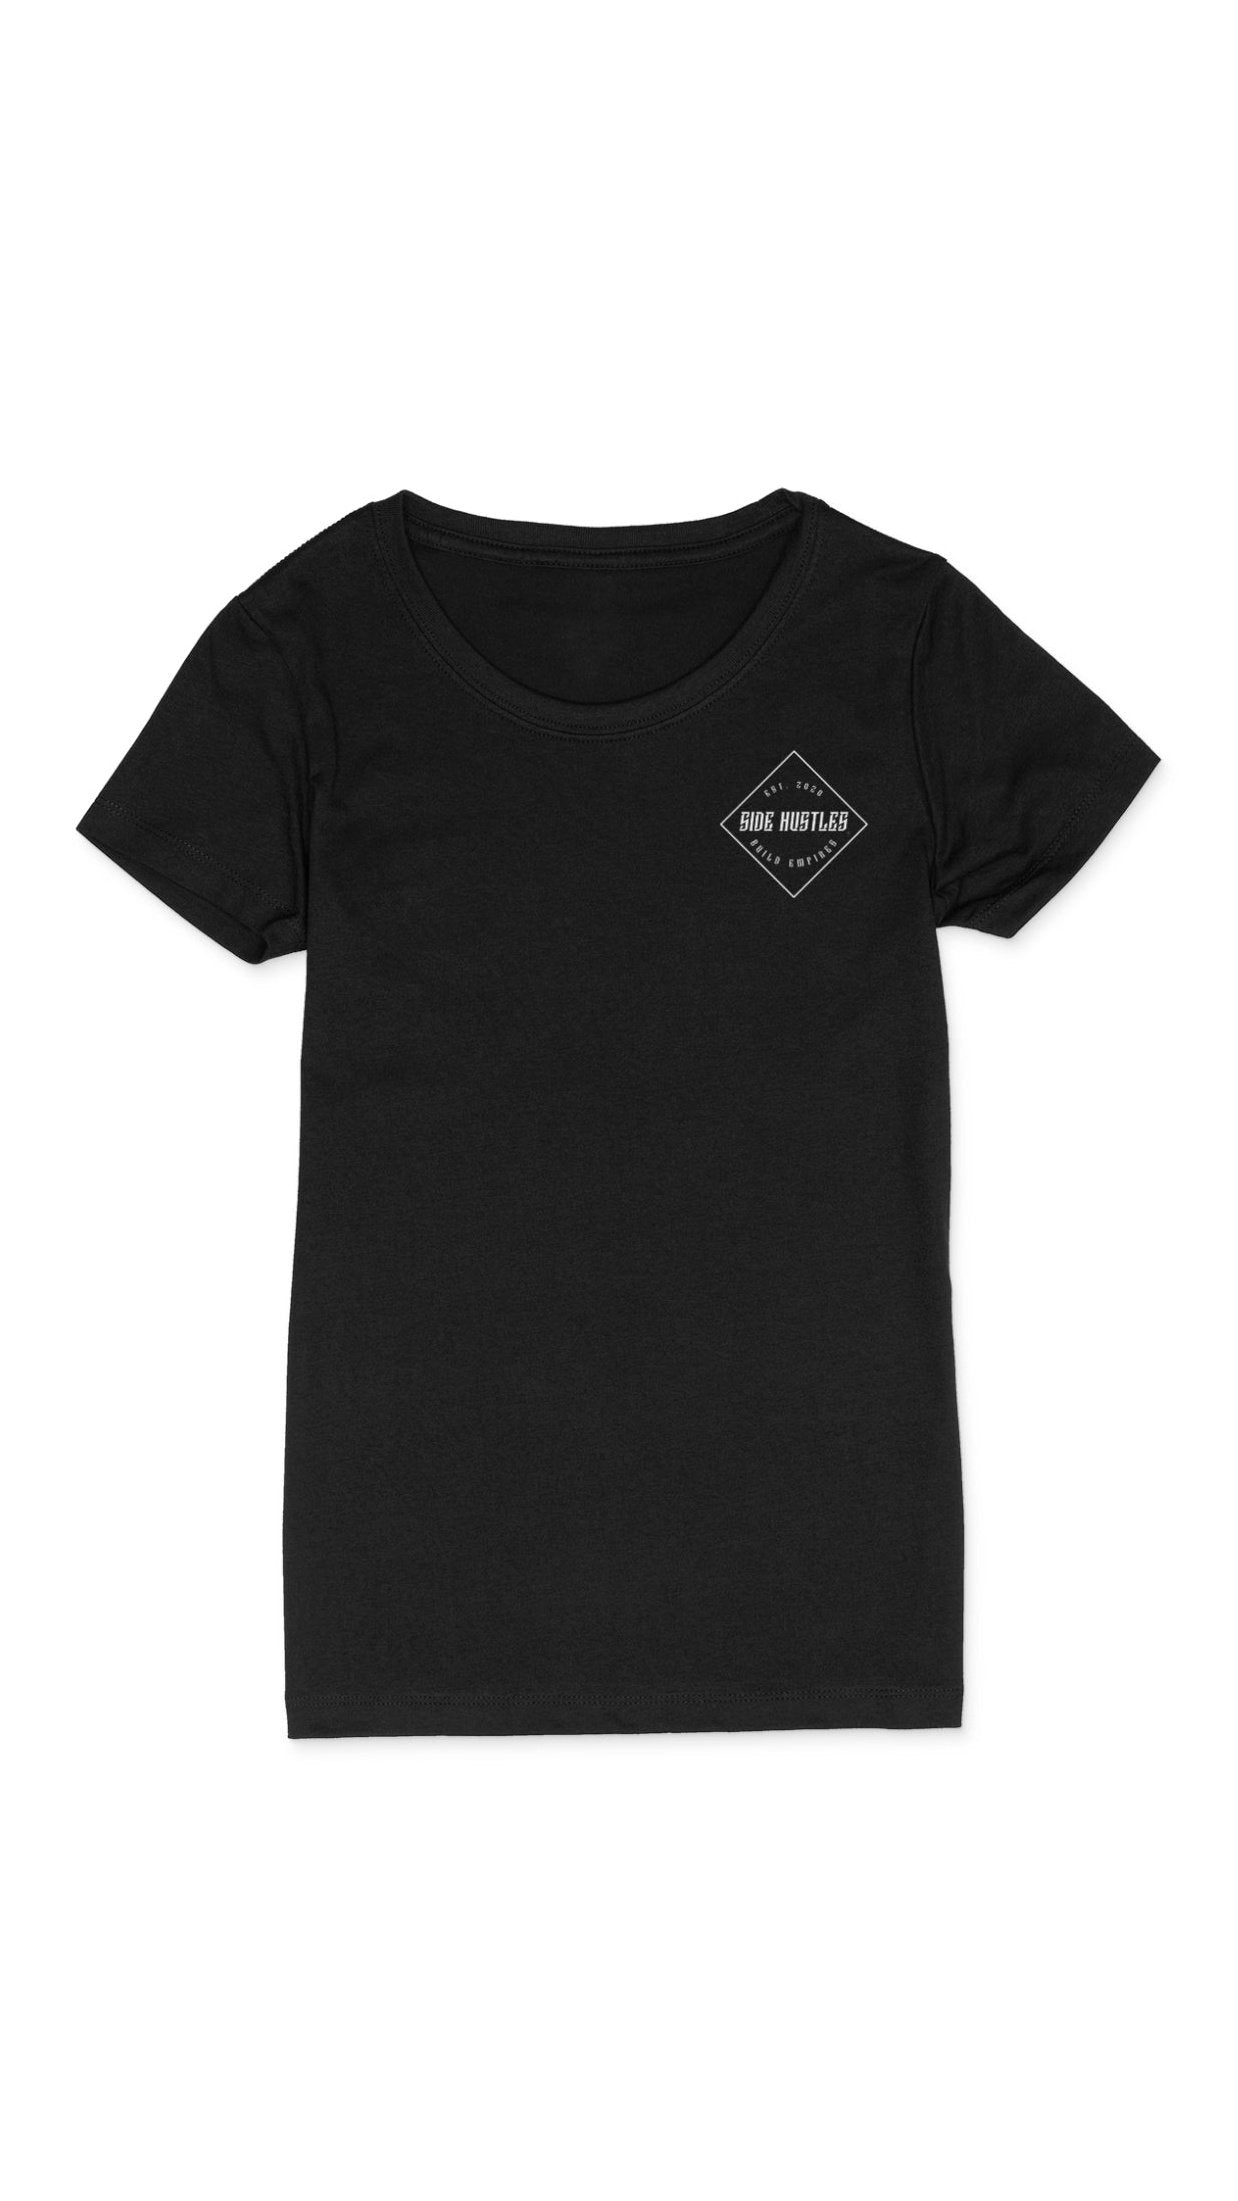 Quality soft black t shirt with screenprinted design for women hustlers